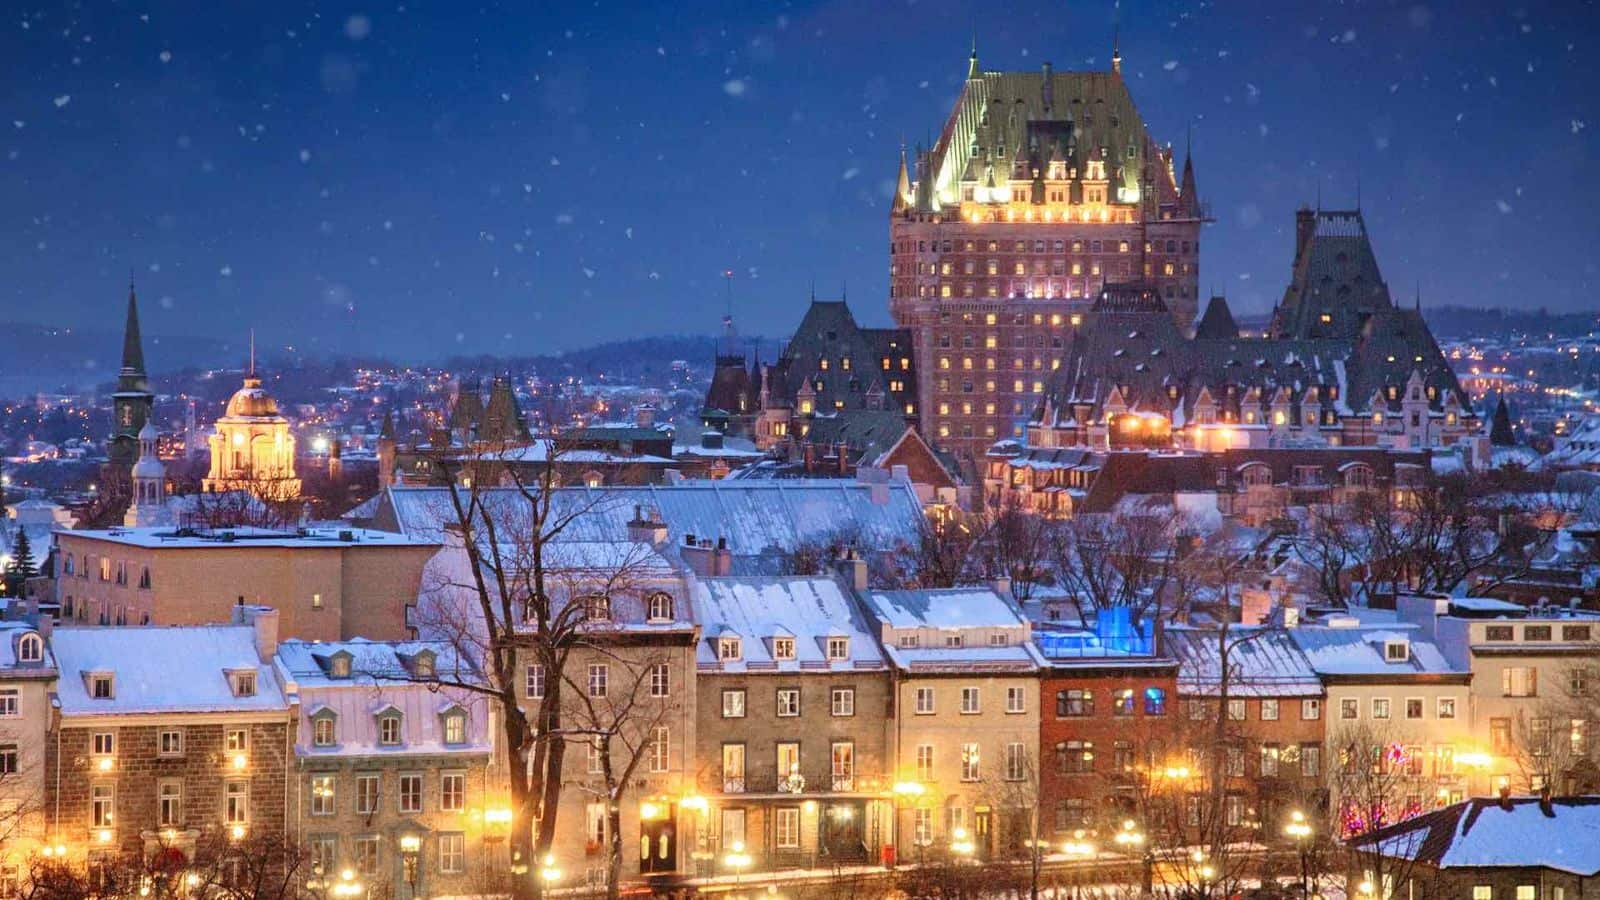 Visiting Quebec City during winter? Do these activities